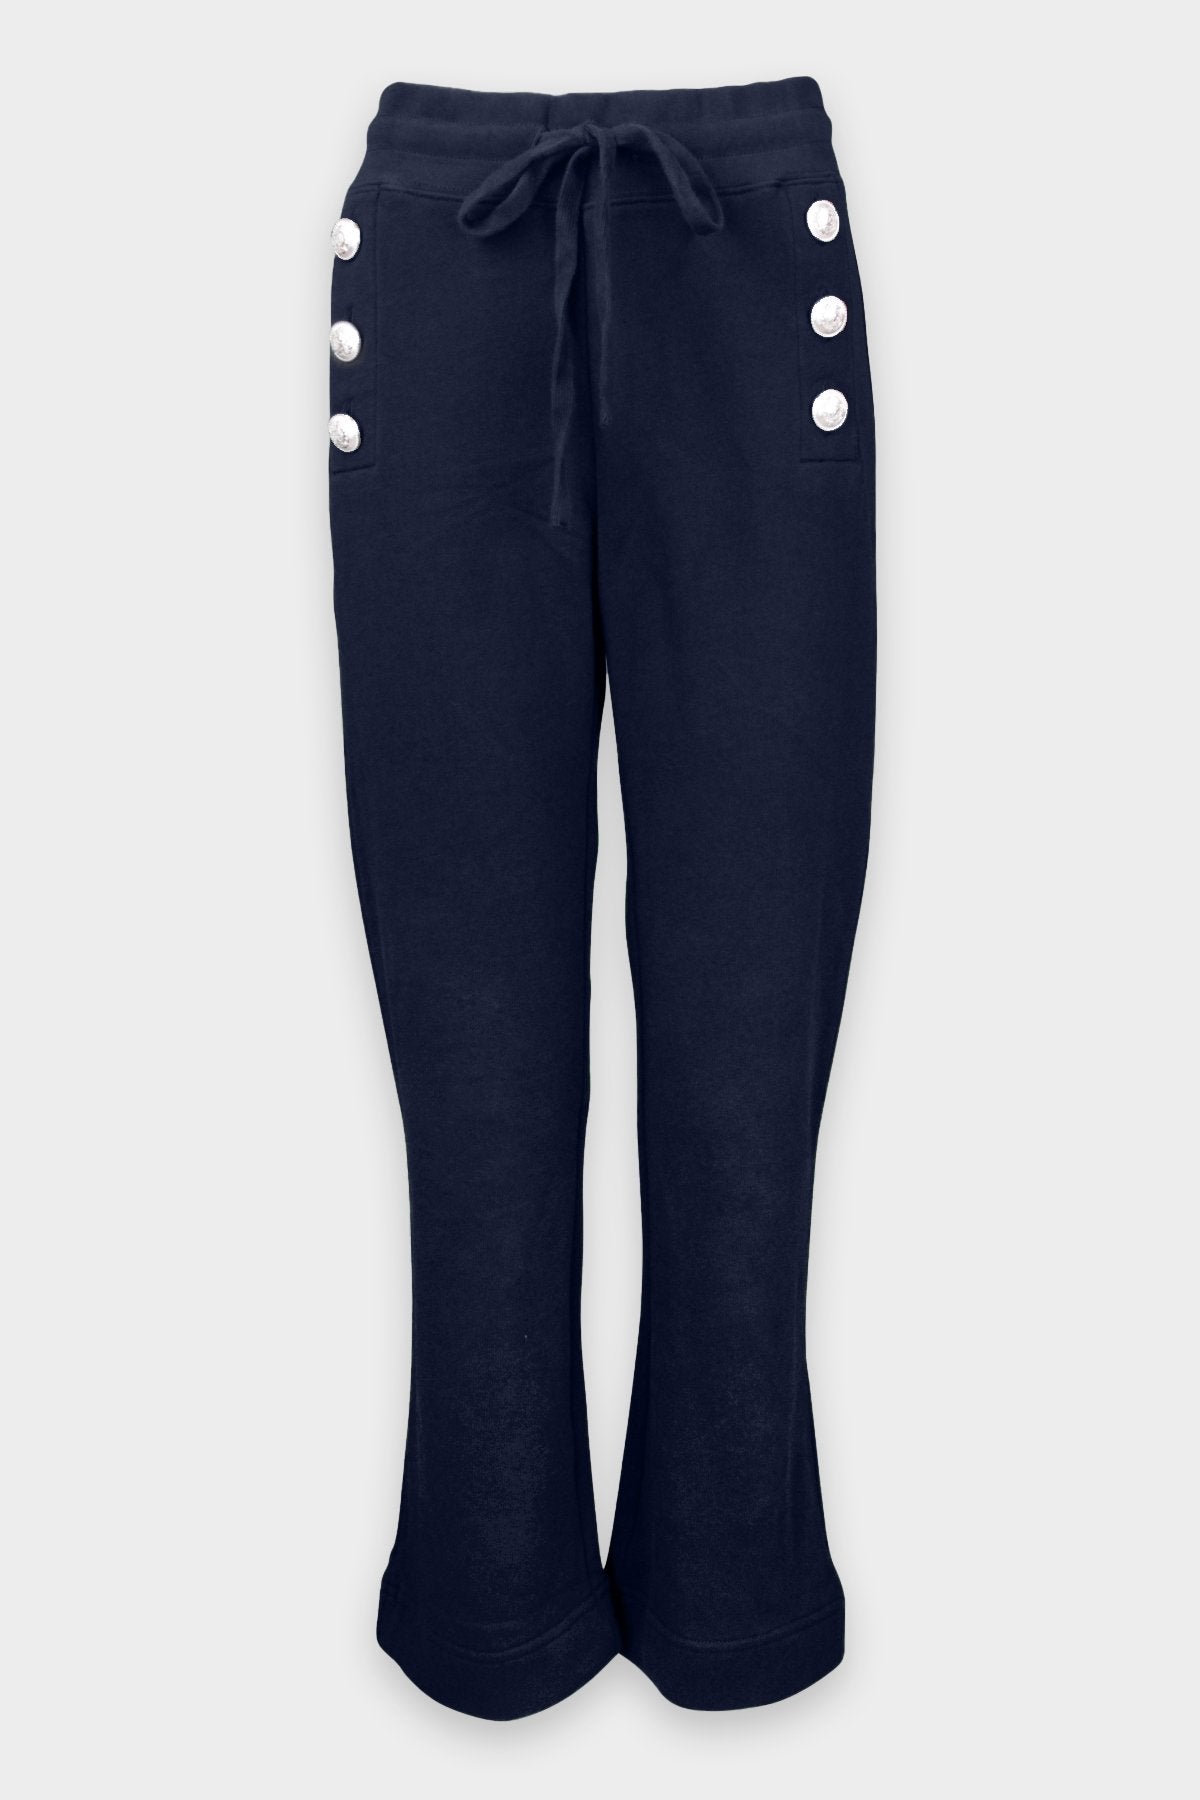 Sian Cropped Flare Sweat Pant with Sailor Buttons in Navy - shop-olivia.com